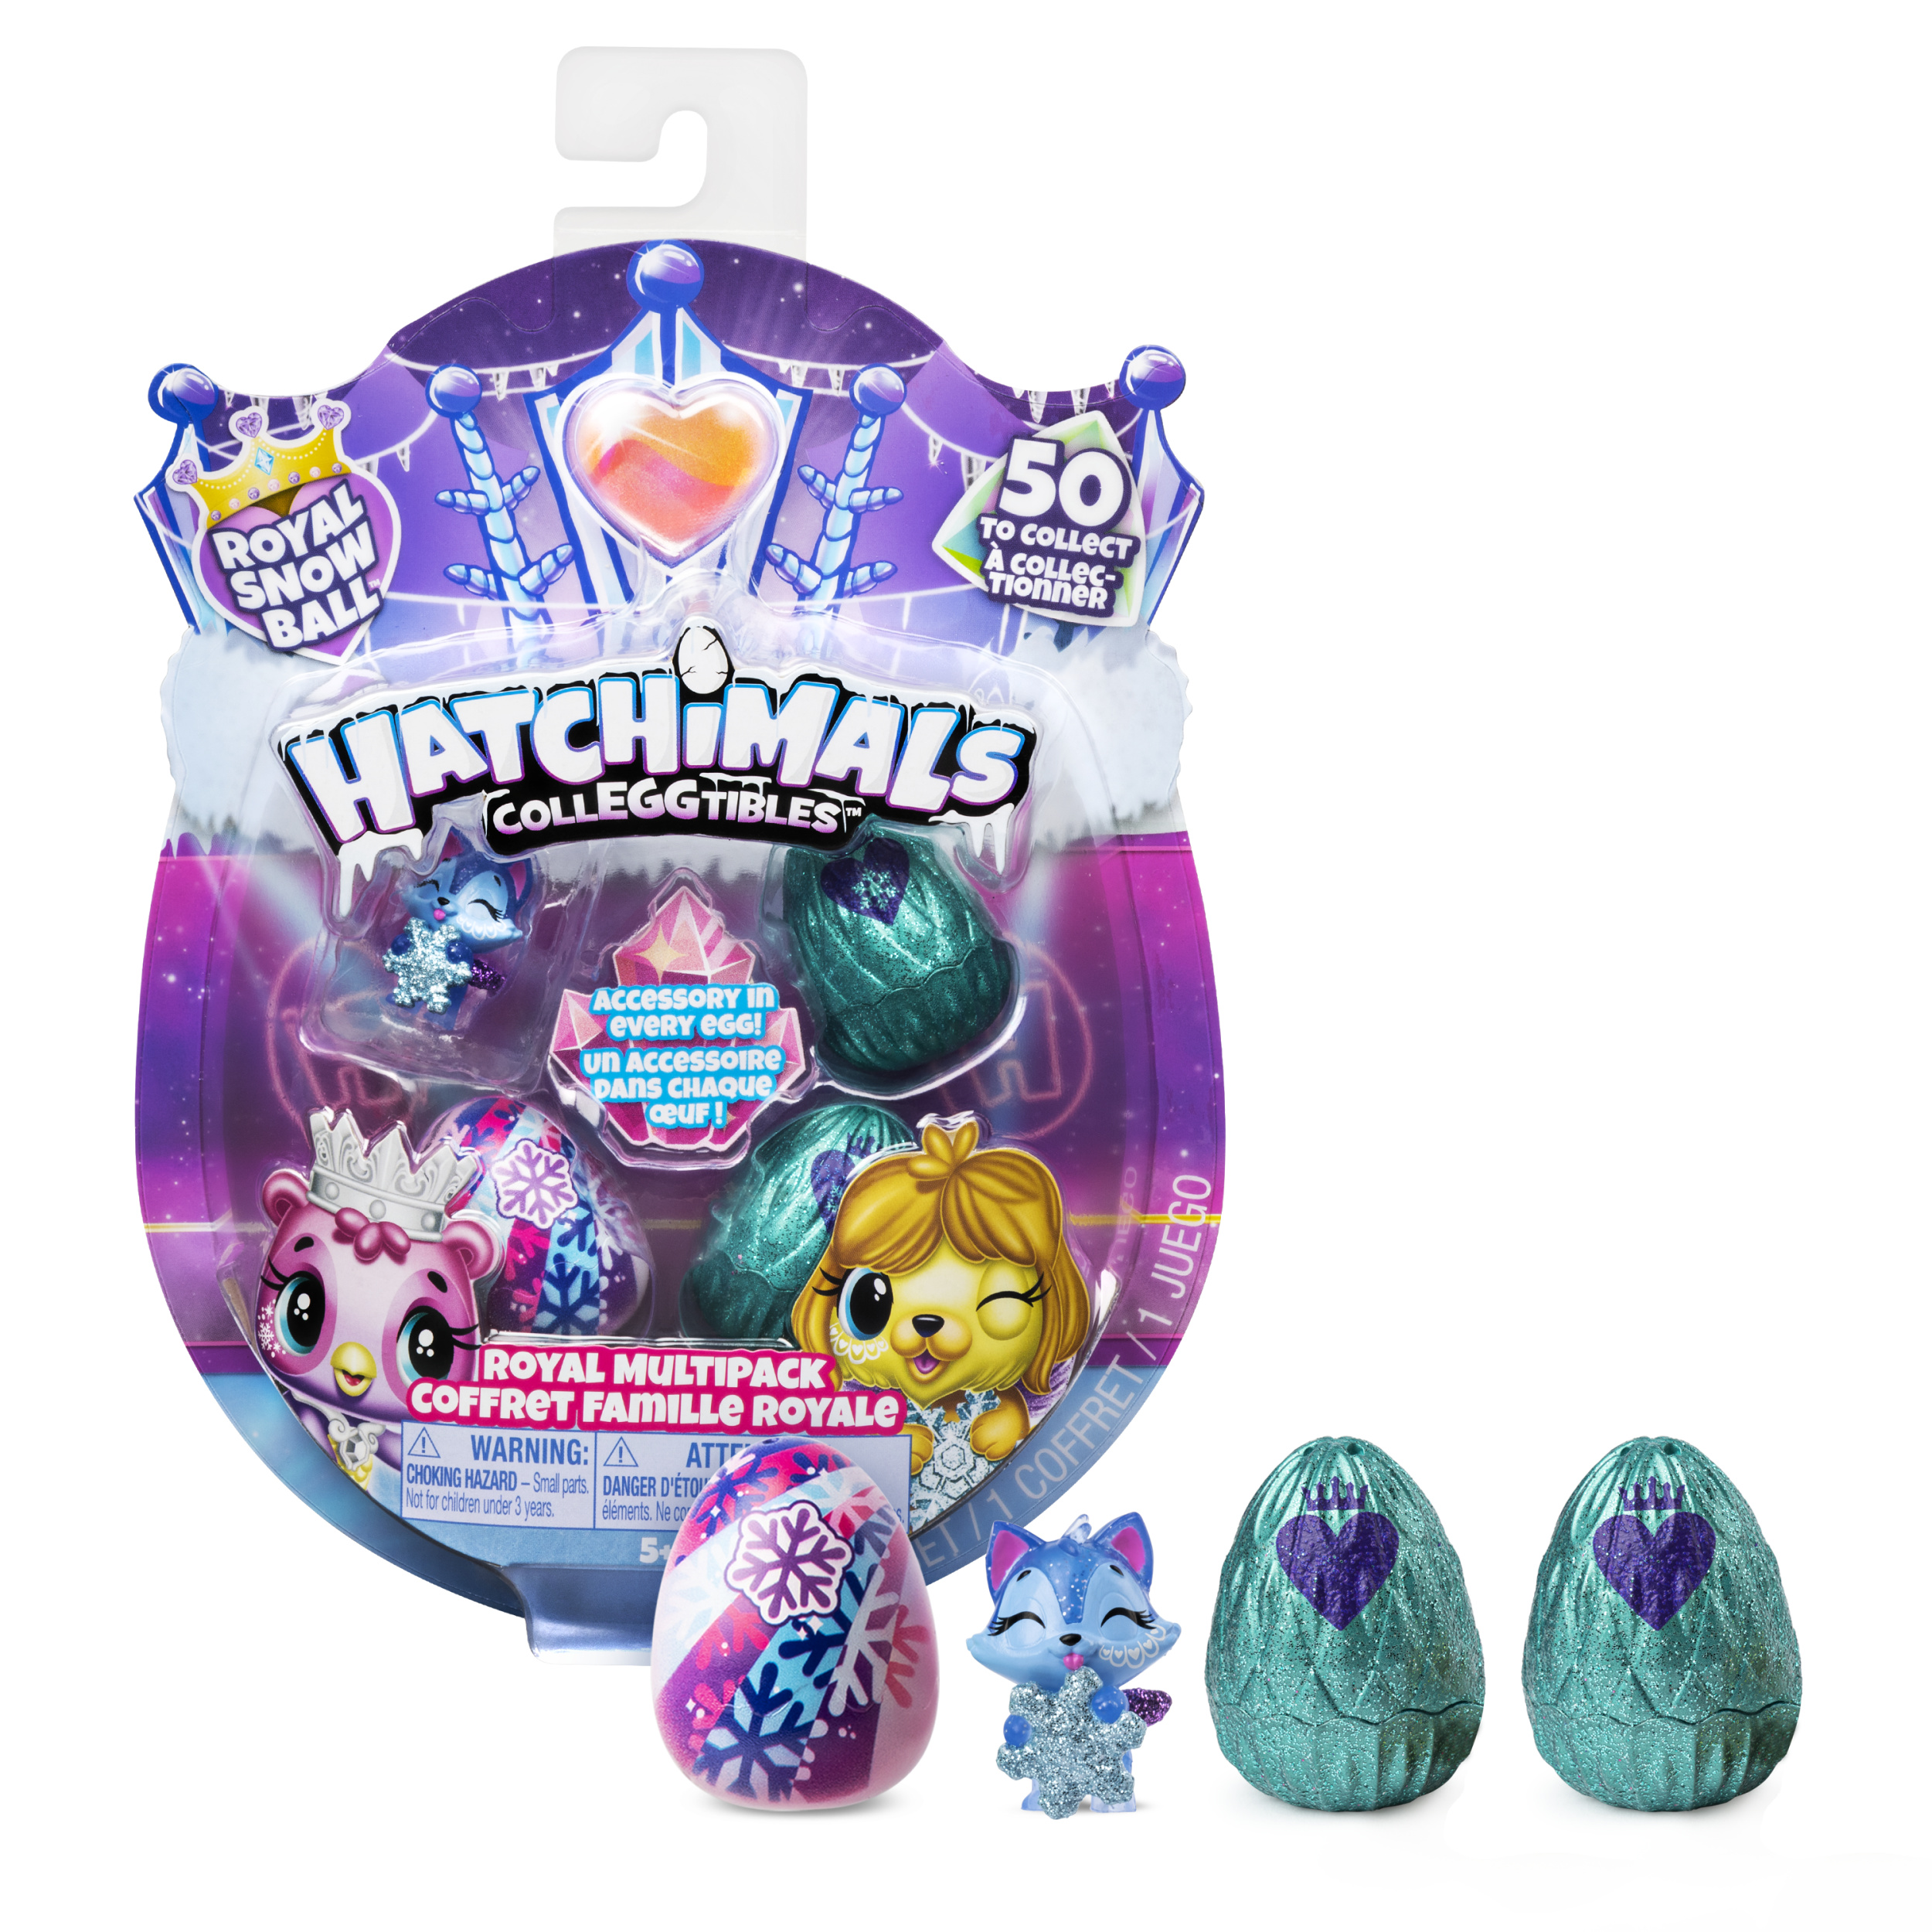 Hatchimals CollEGGtibles, Royal Multipack with 4 Hatchimals and Accessories, for Kids Aged 5 and up (Styles May Vary) - image 1 of 8